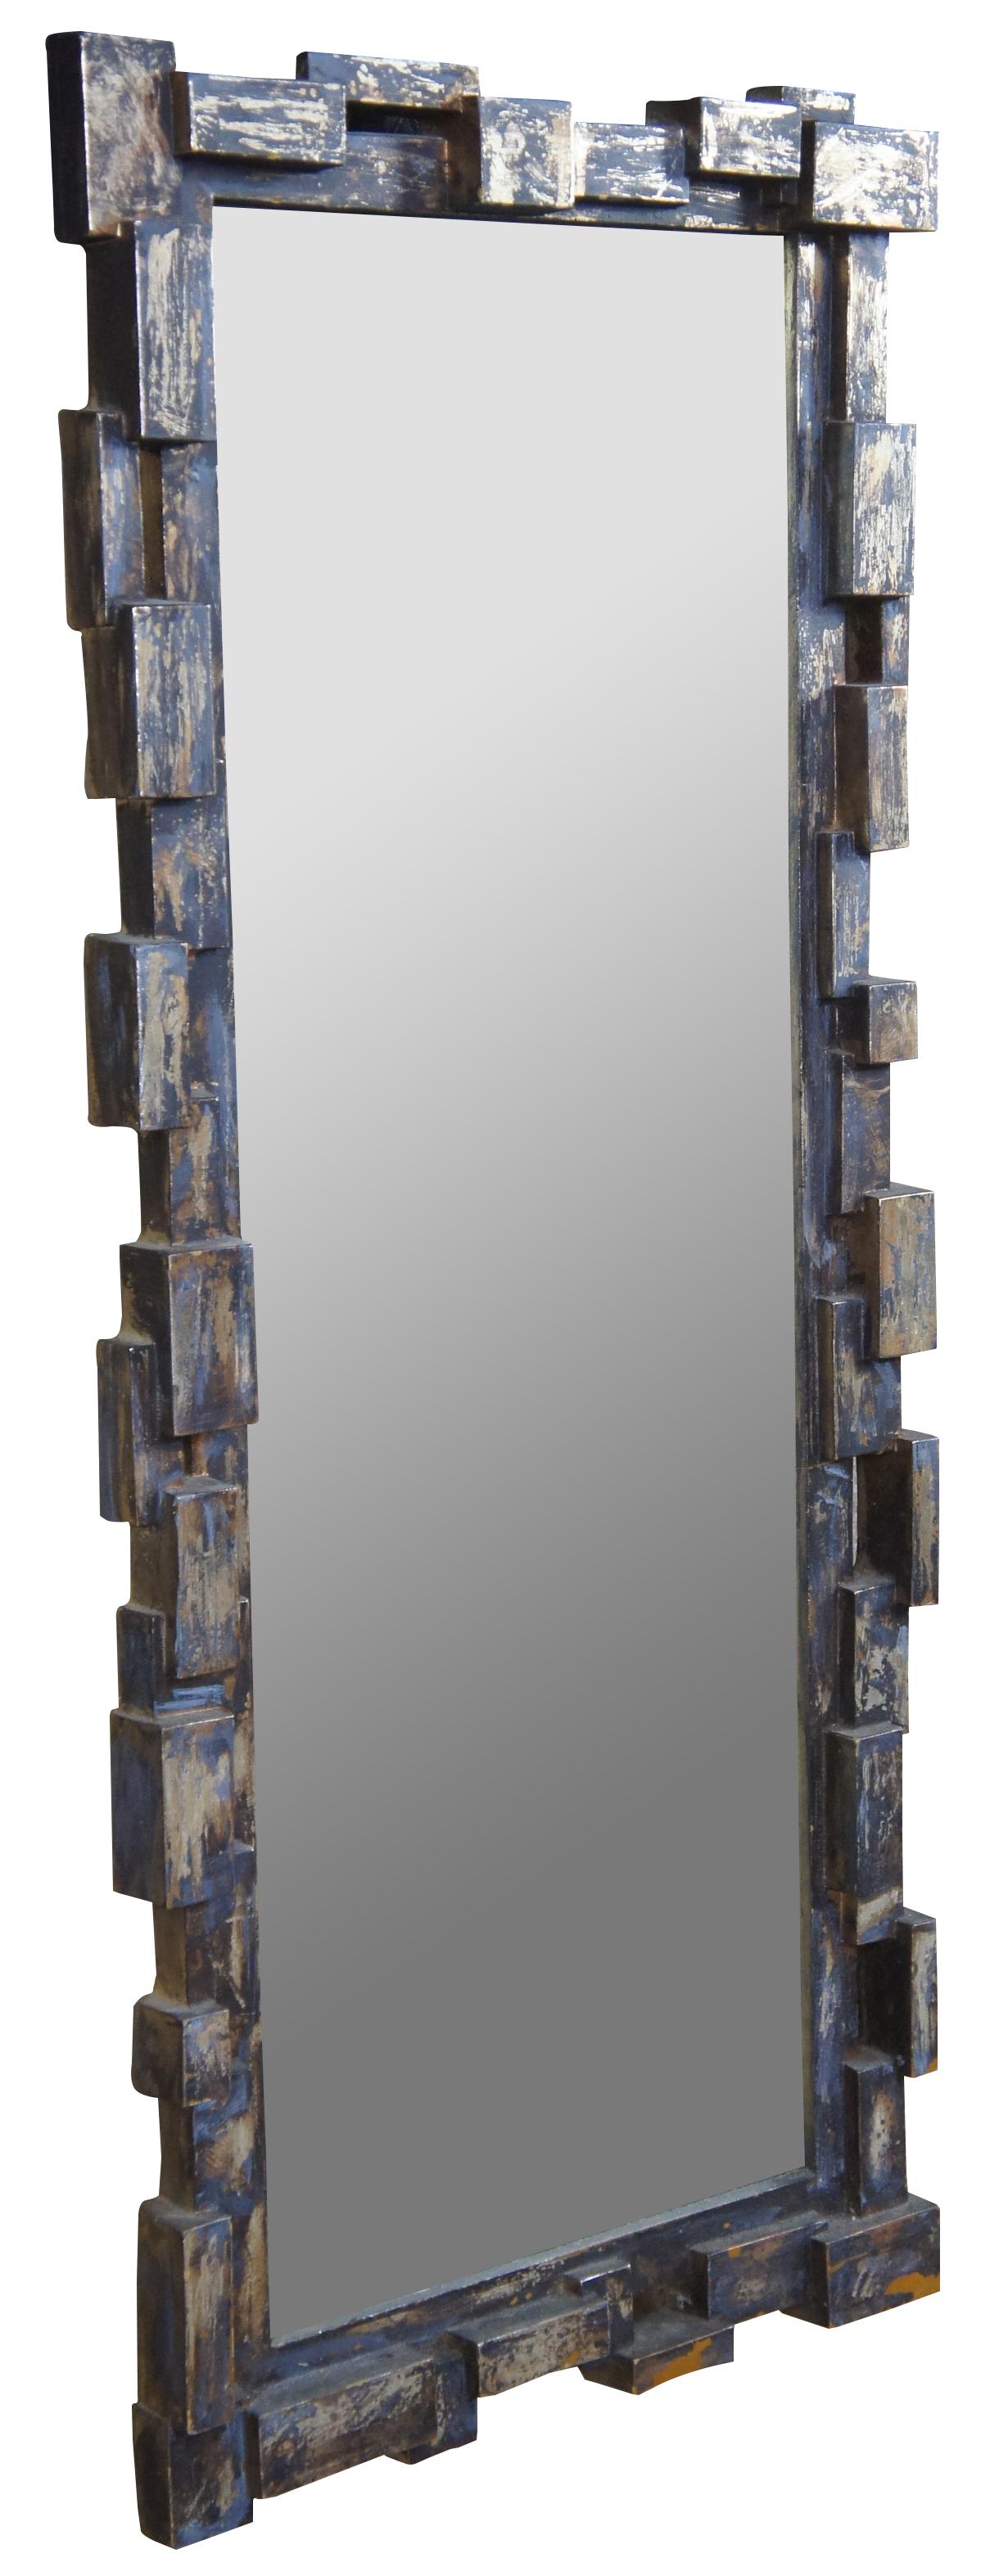 Brutalist inspired wall mirror. Features a black and gold distressed finish. Measures: 41”.
  